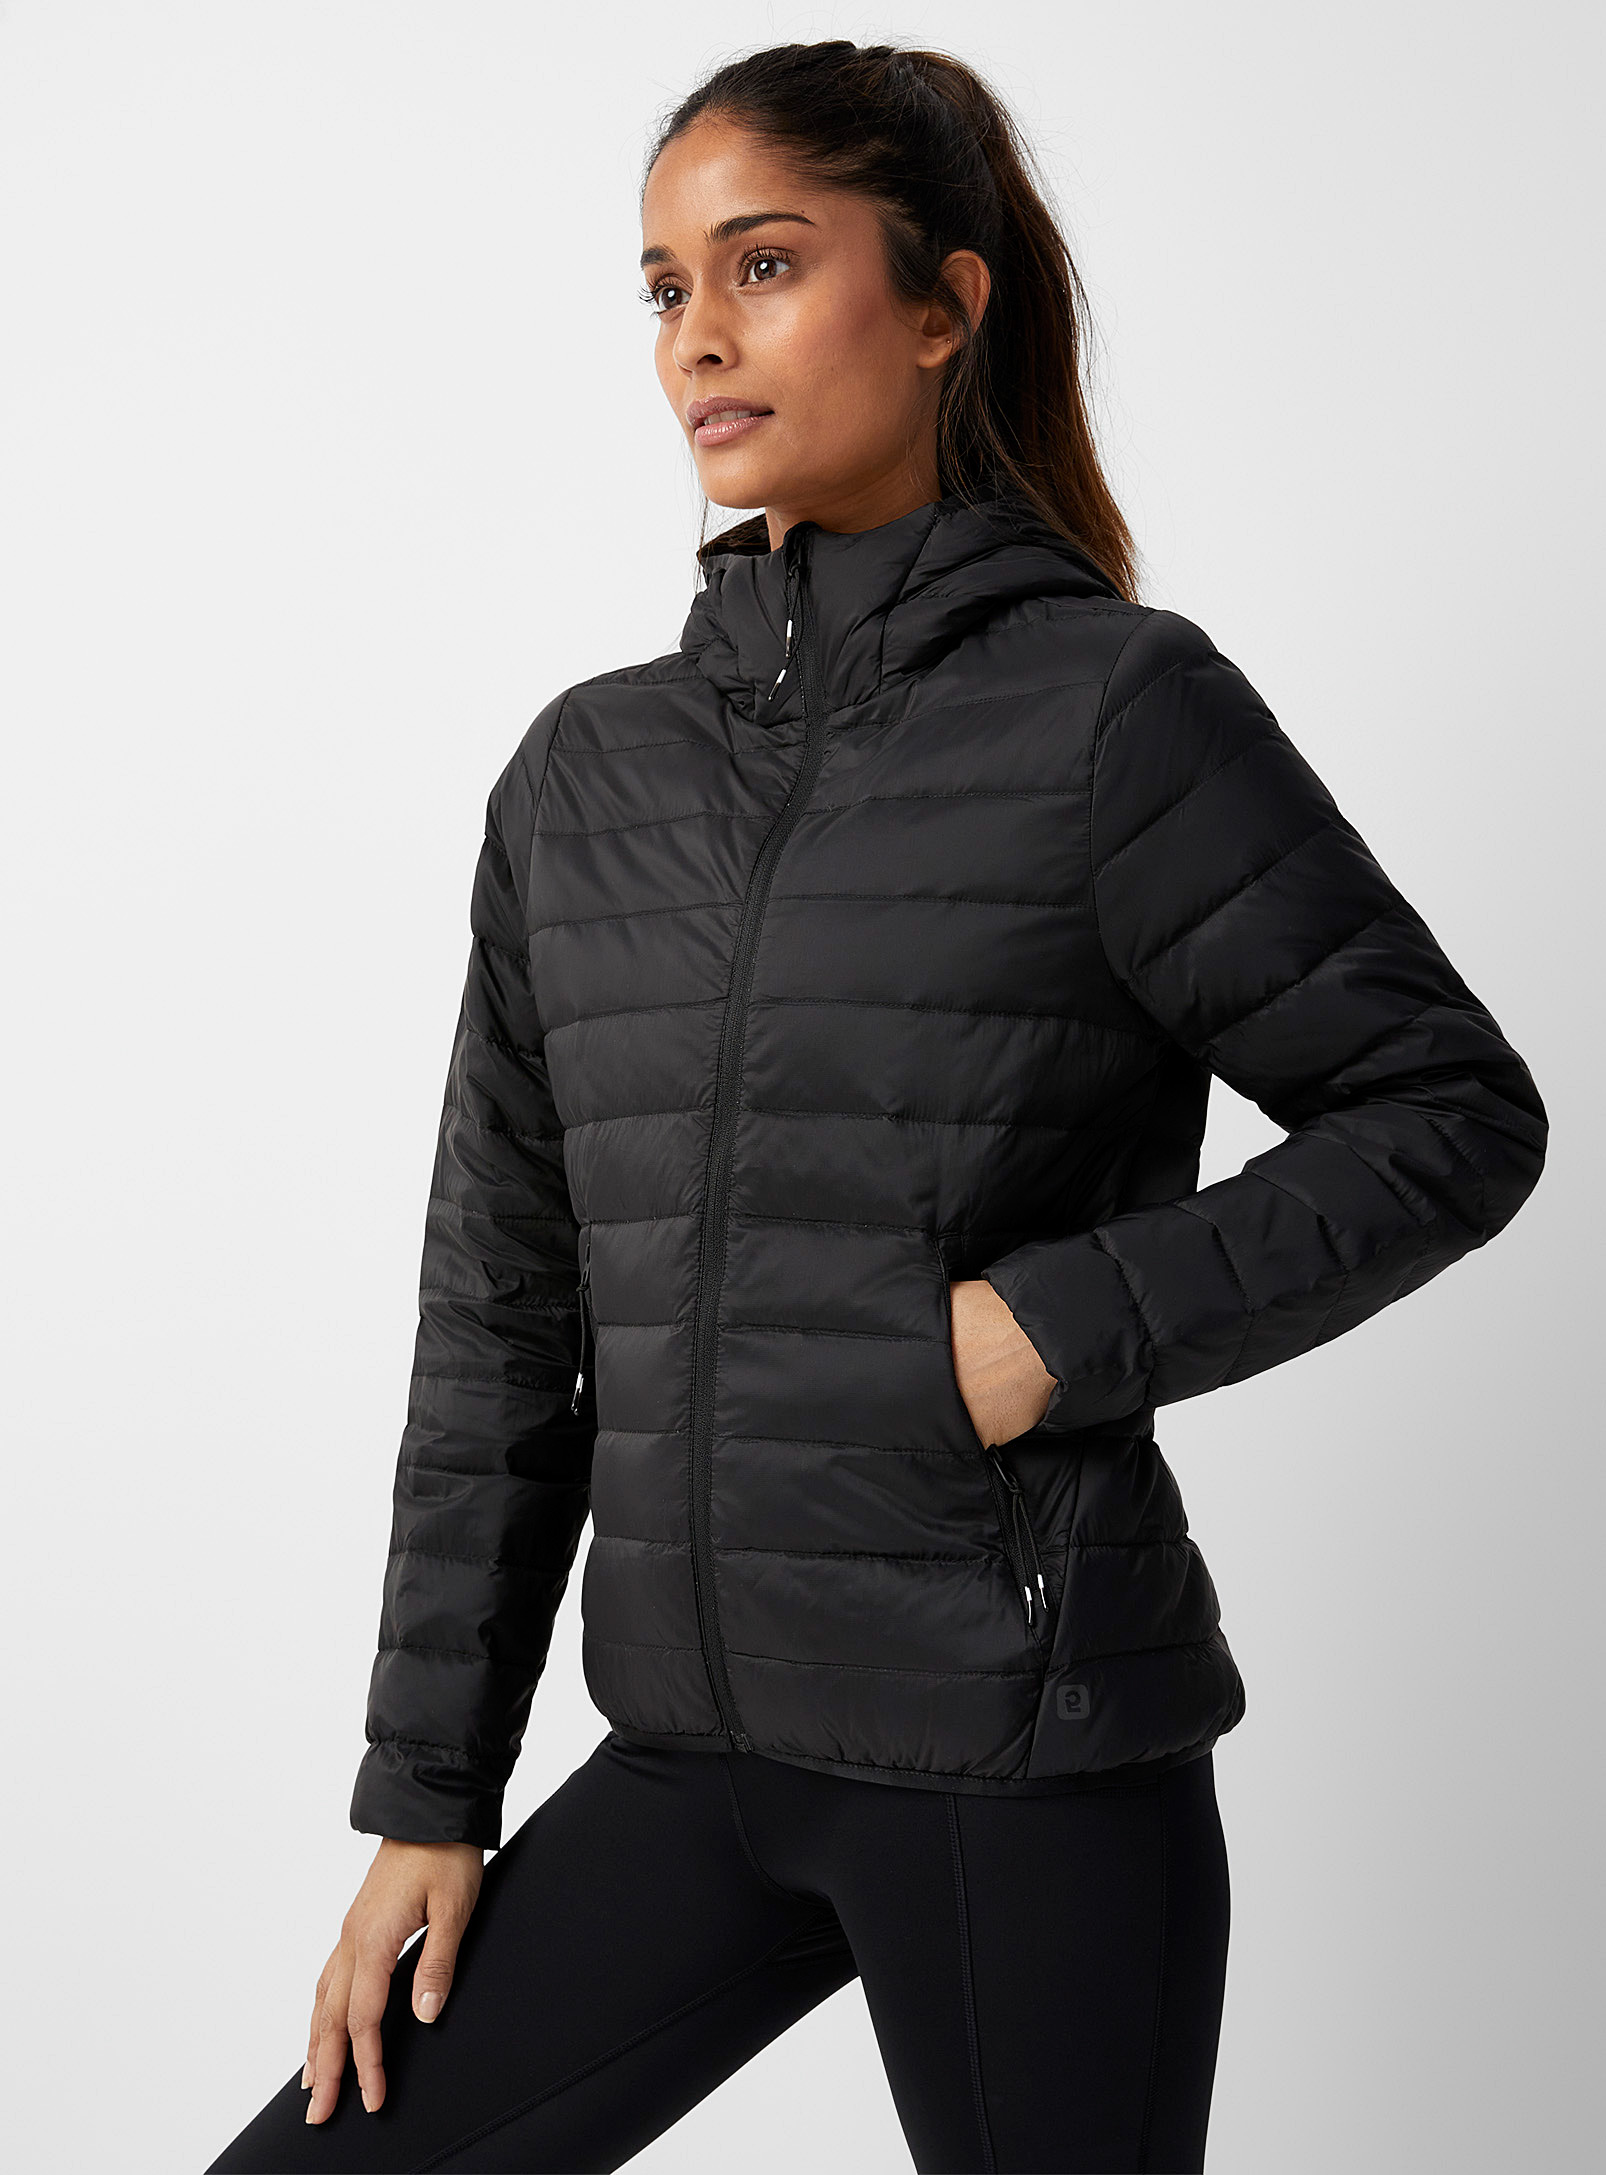 I.FIV5 - Women's Recycled nylon packable puffer jacket